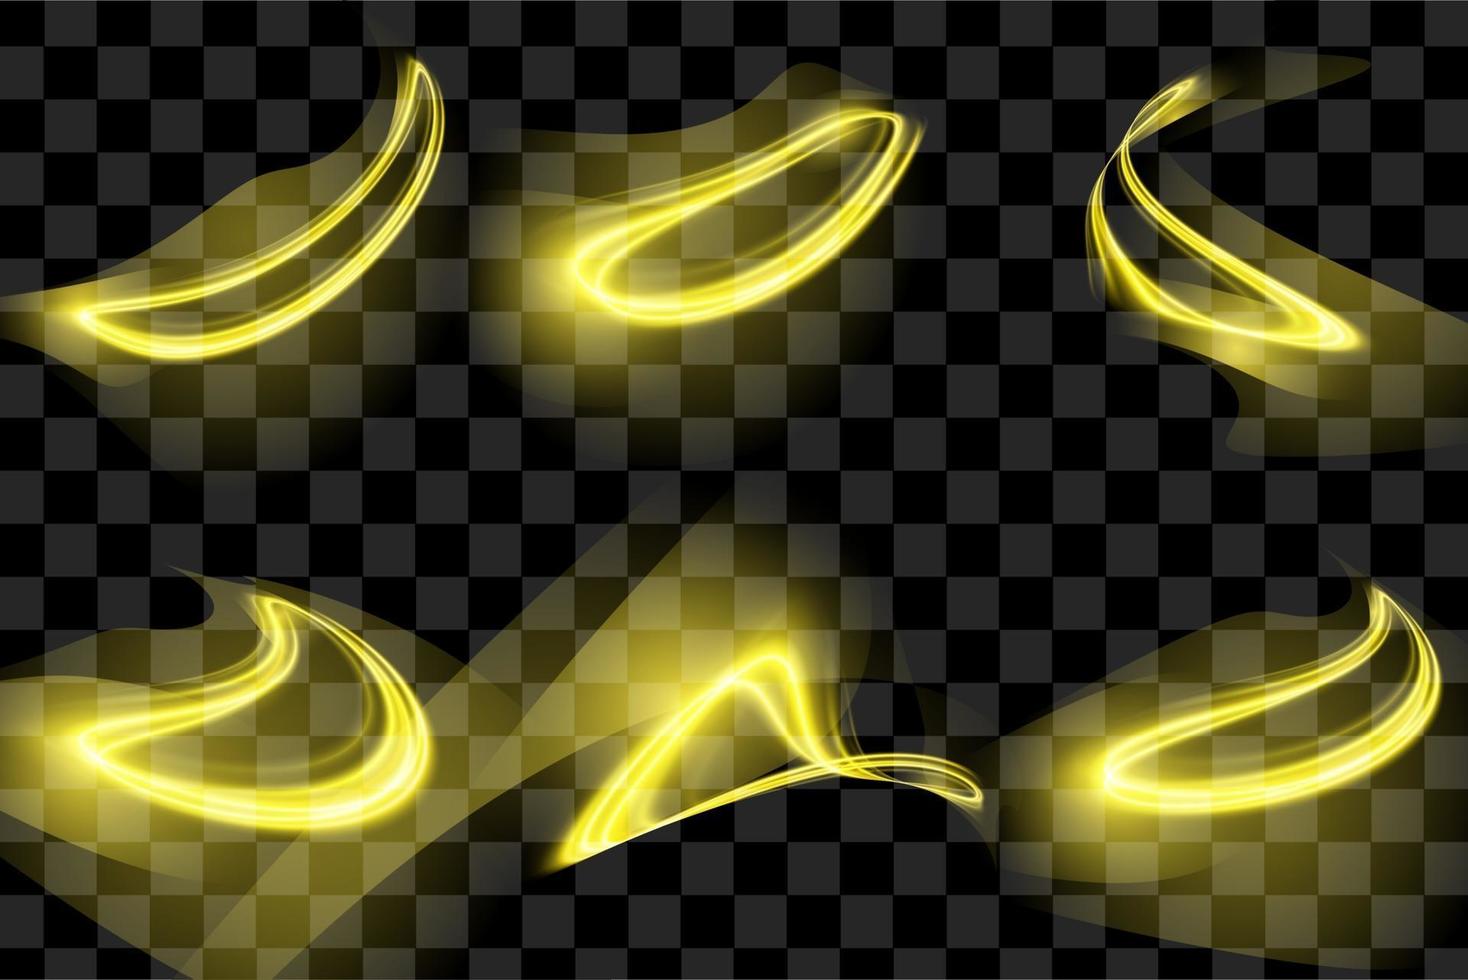 Set of yellow abstract object with shiny glow effect isolated vector